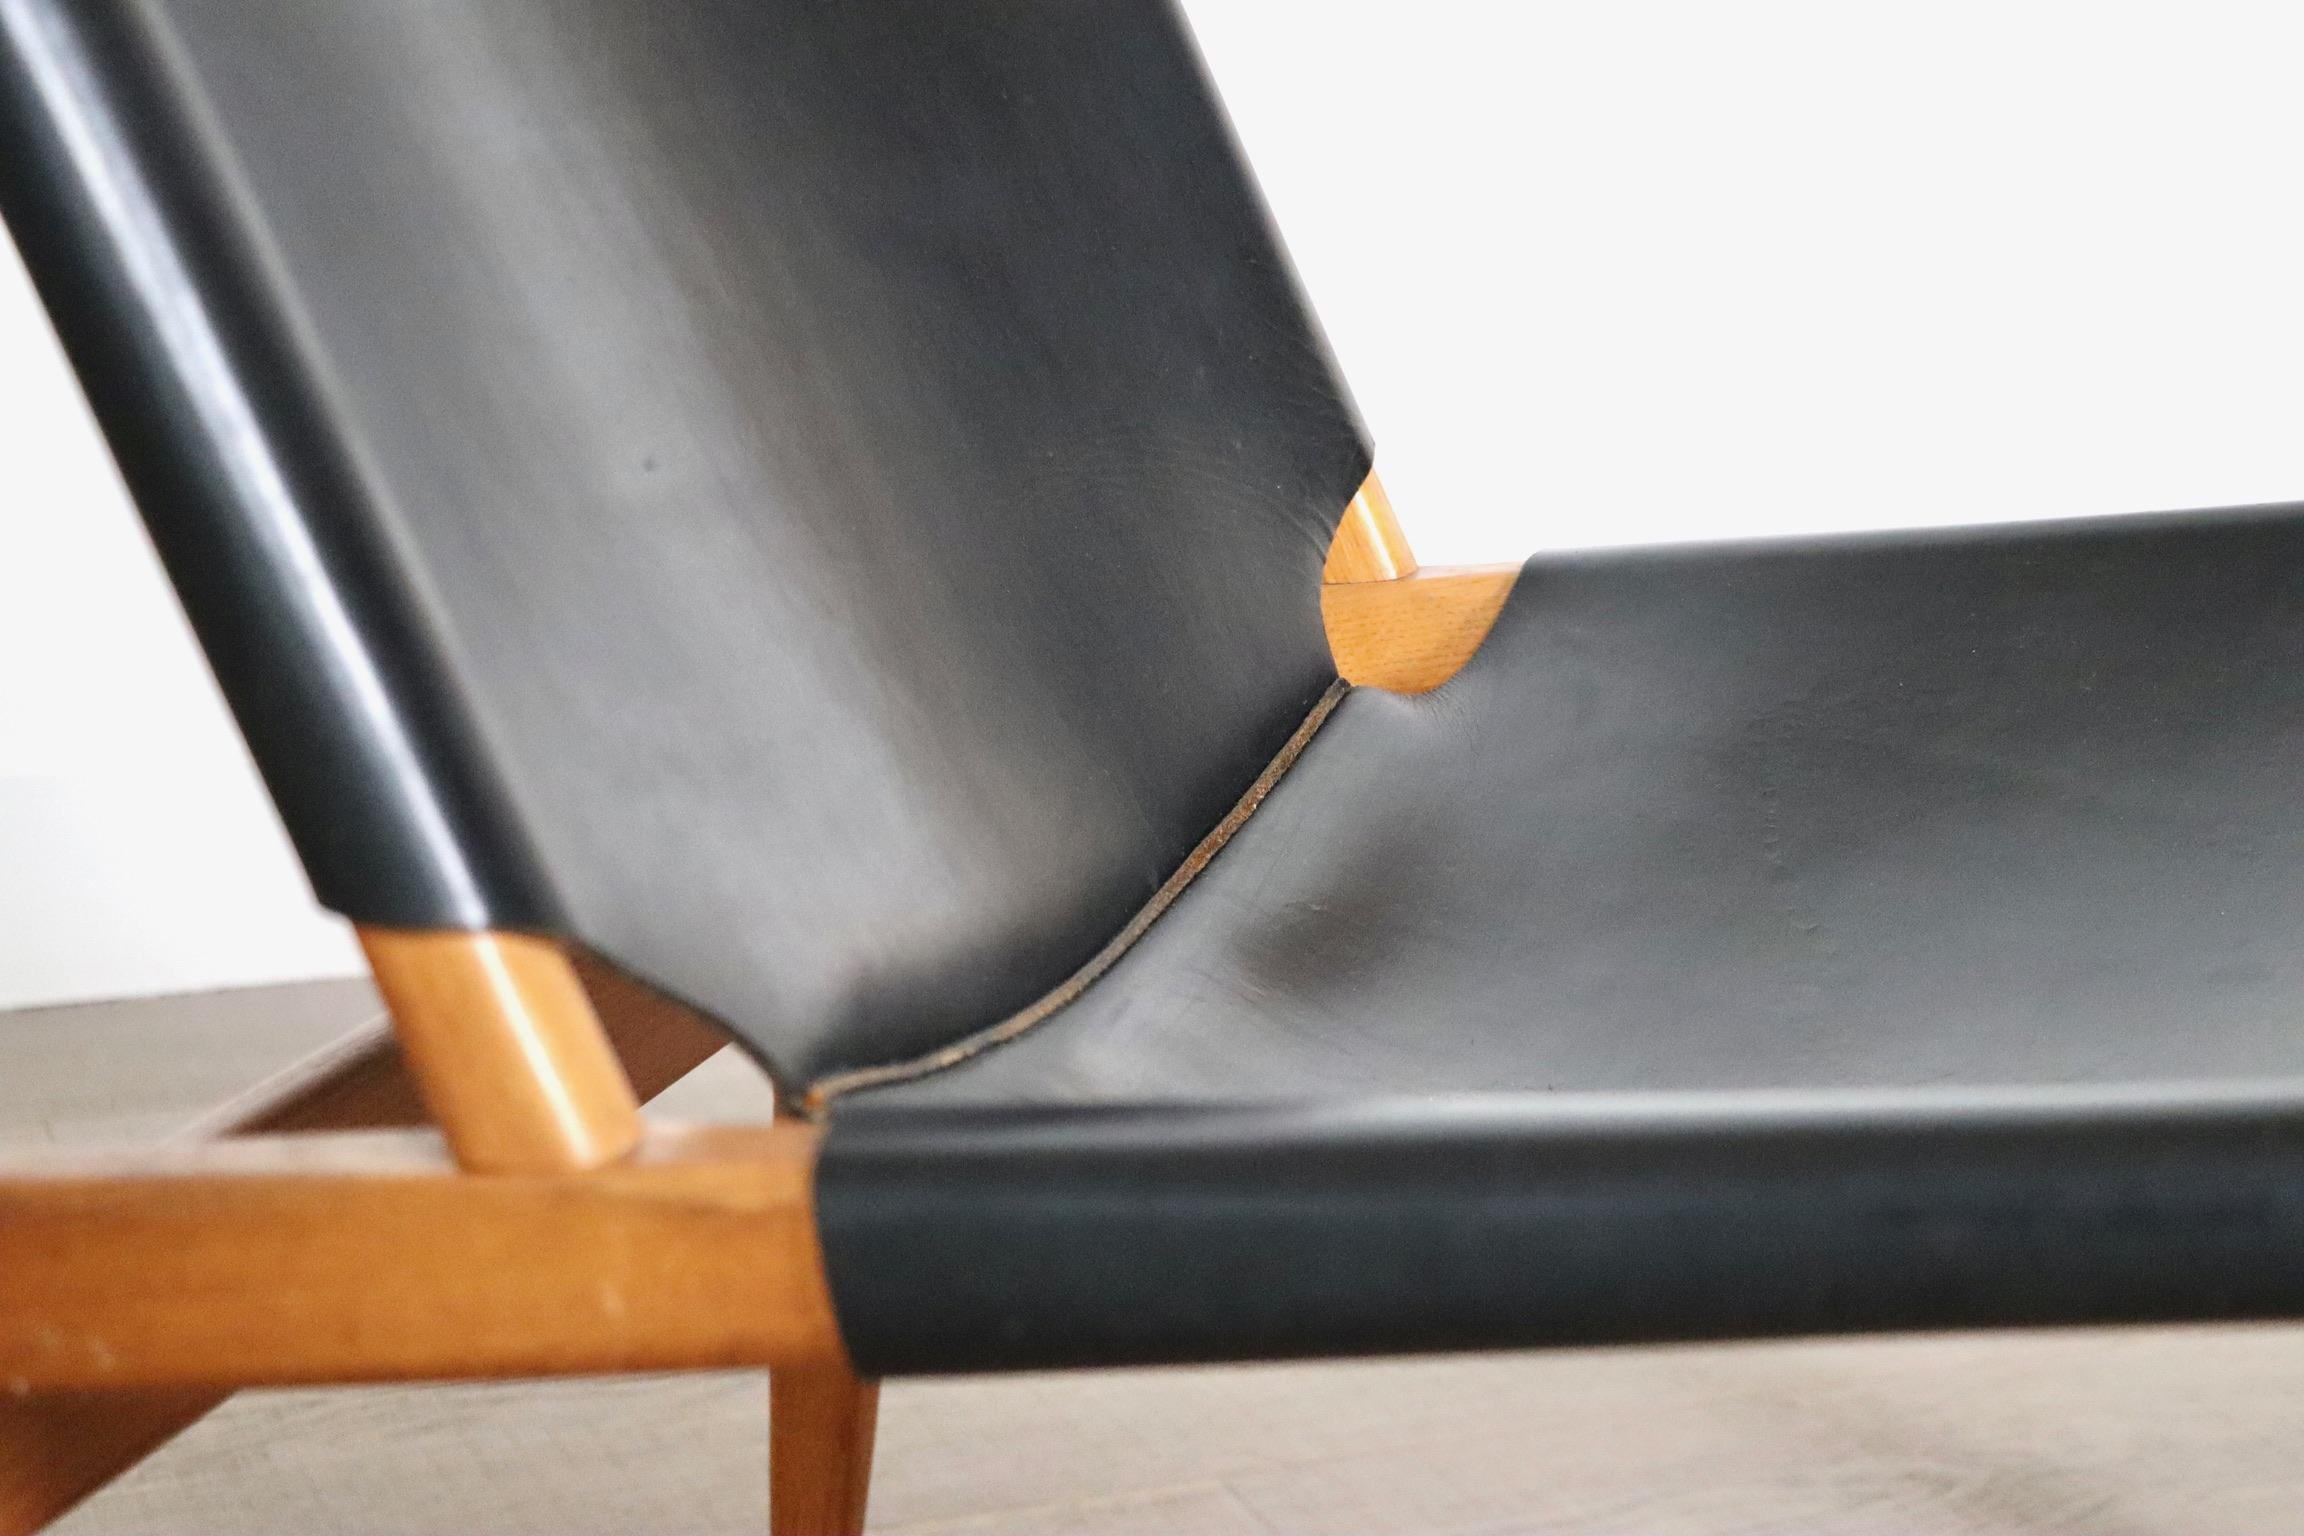 Chimney Lounge Chair Model 1192 By Franz Xaver Lutz For WK Möbel, 1958 For Sale 2